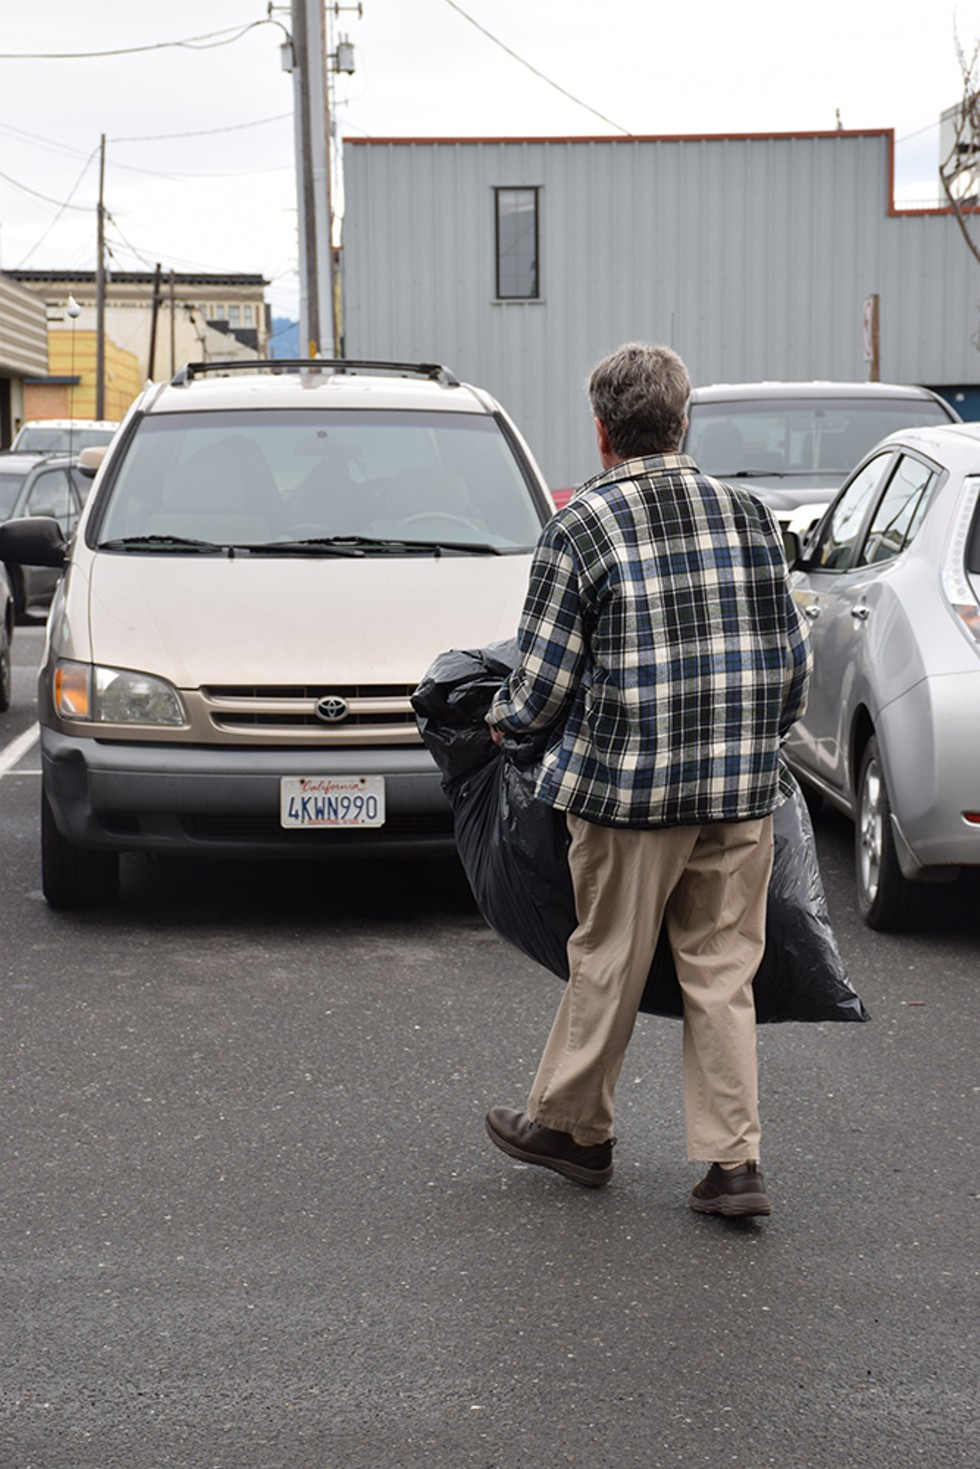 Robert Lohn with a garbage bag full of donated coats picked up from the North Coast Co-op in Eureka - PHOTO BY THADEUS GREENSON